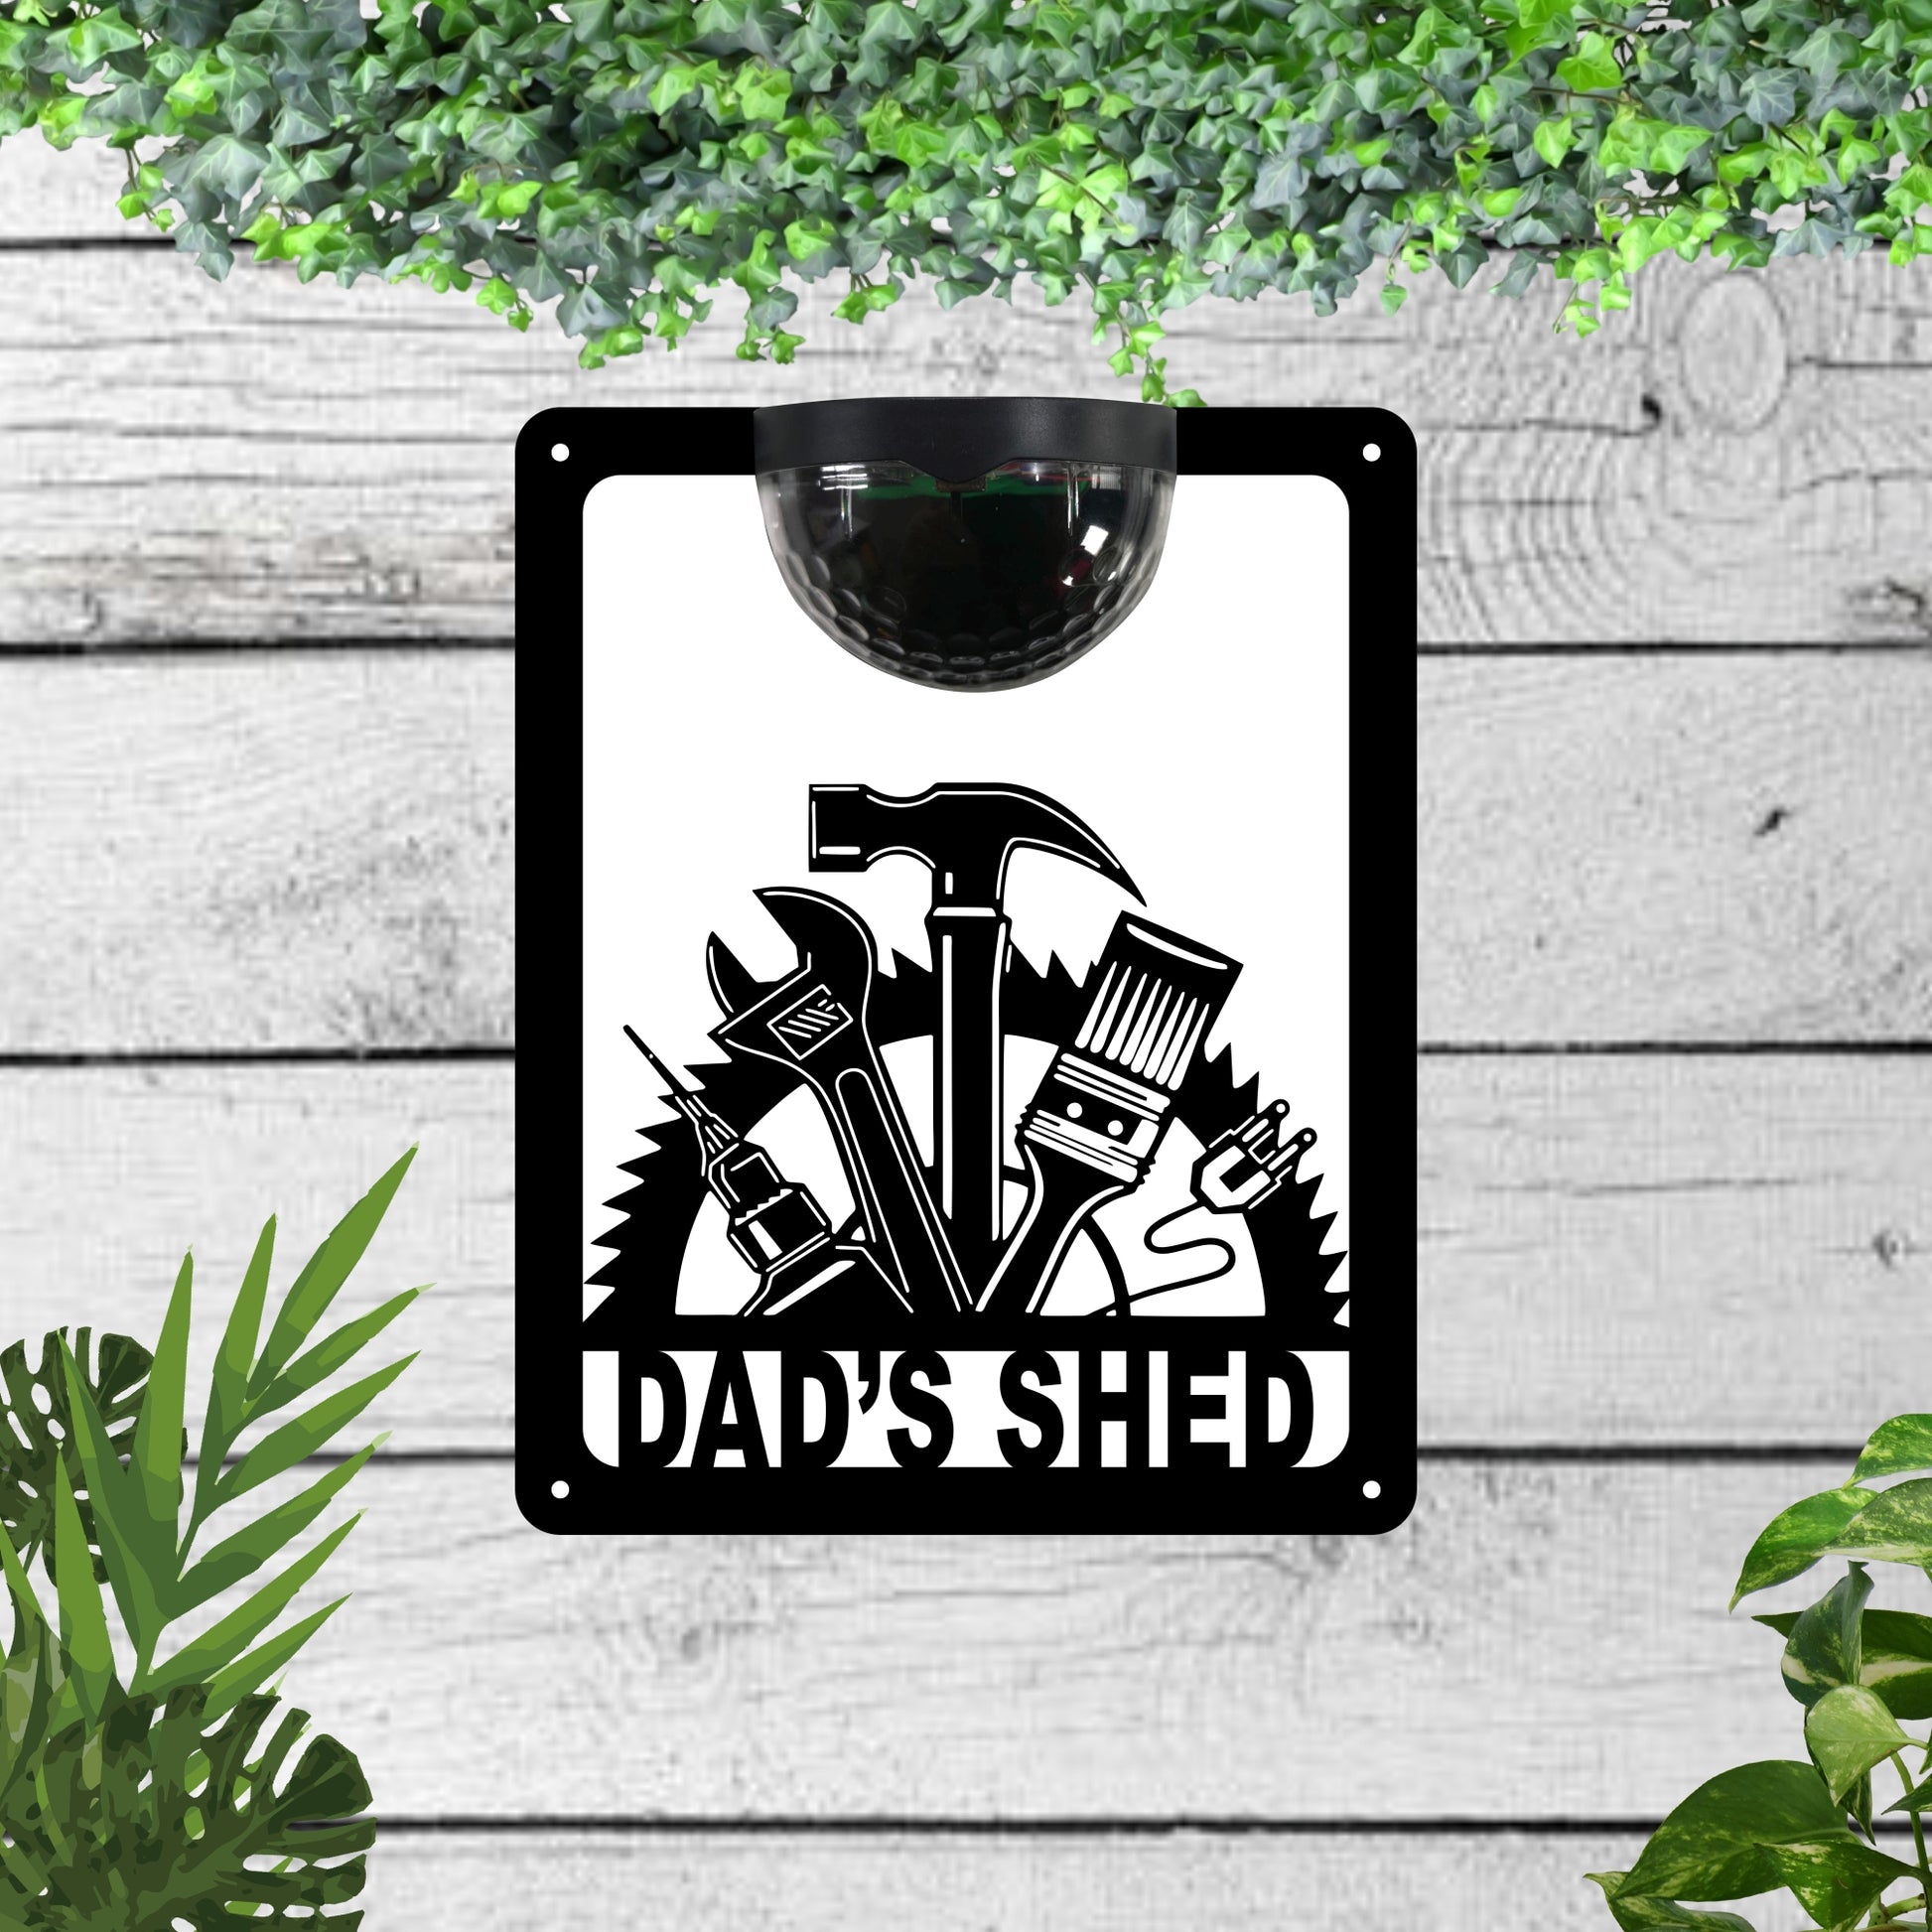 Garden solar wall plaque featuring dads shed | John Alans